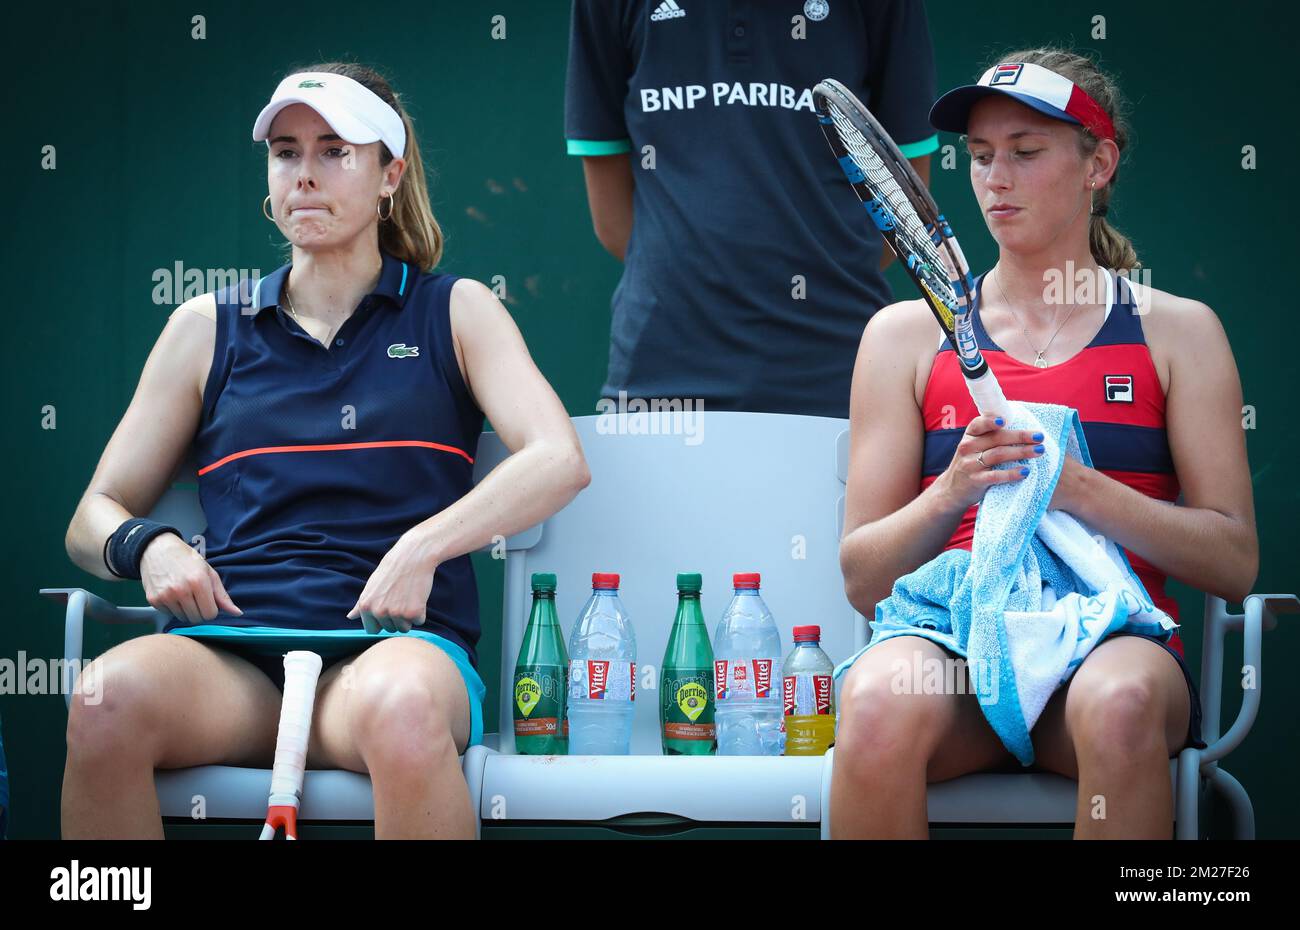 French Alize Cornet and Belgian Elise Mertens pictured during a doubles tennis game between Belgian Elise Mertens and French Alize Cornet versus US Bethanie Mattek-Sands and Czech Lucie Safarova, in the first round of the women's doubles tournament at the Roland Garros French Open tennis tournament, in Paris, France, Thursday 01 June 2017. The main table Roland Garros Grand Slam takes place from 29 May to 11 June 2017. BELGA PHOTO VIRGINIE LEFOUR Stock Photo